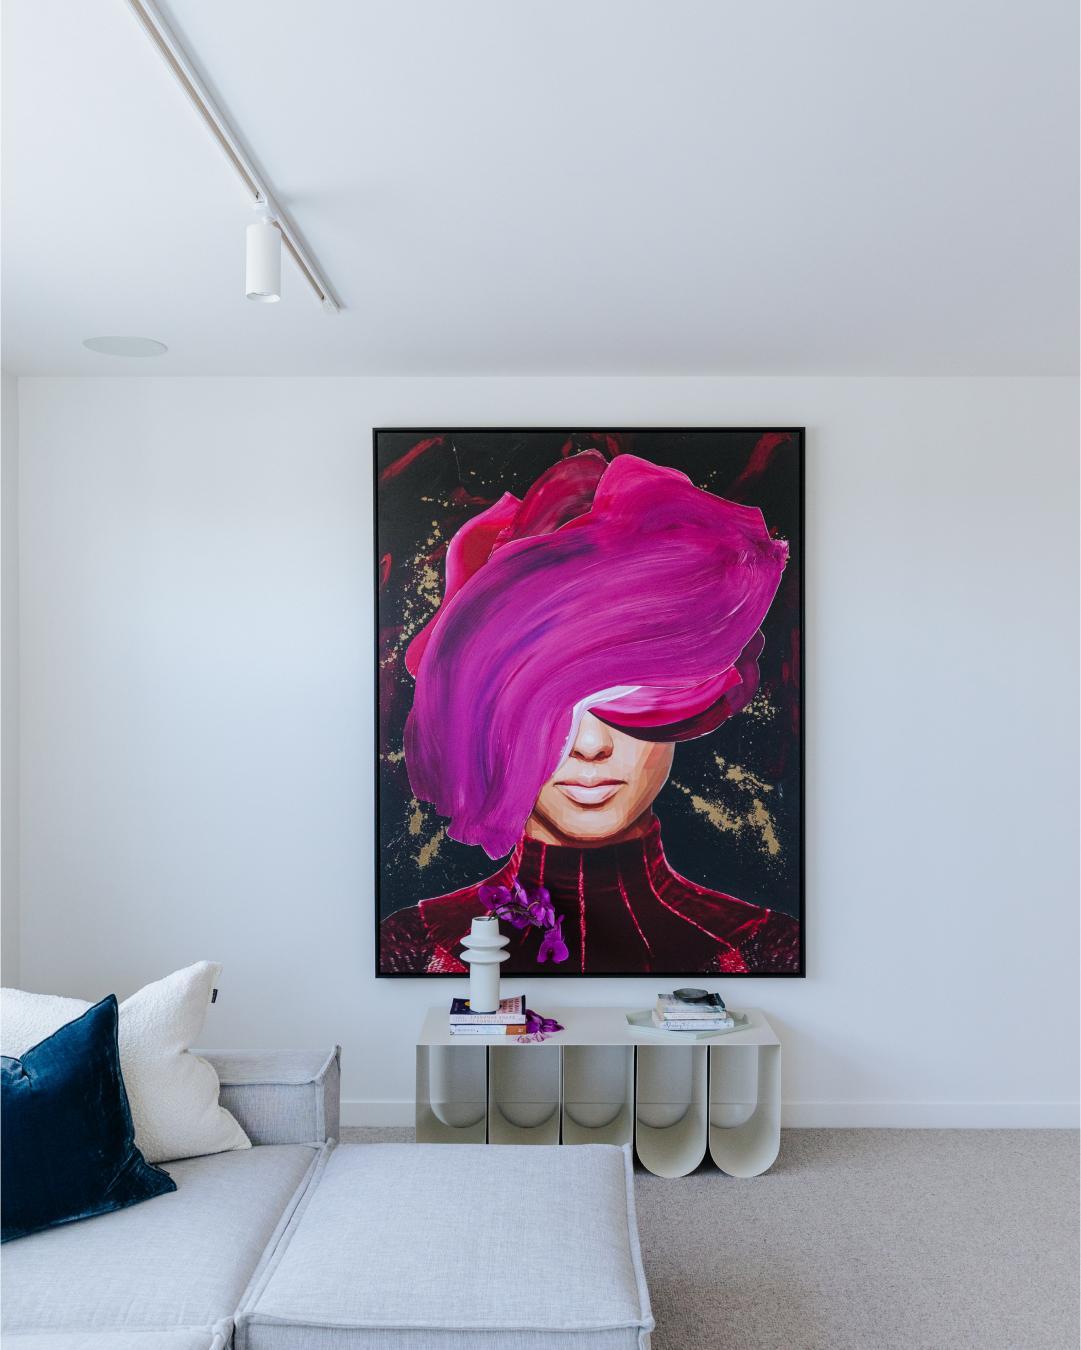 Brent Rosenberg's painting, 'the way I stare' hung in the Elba display home